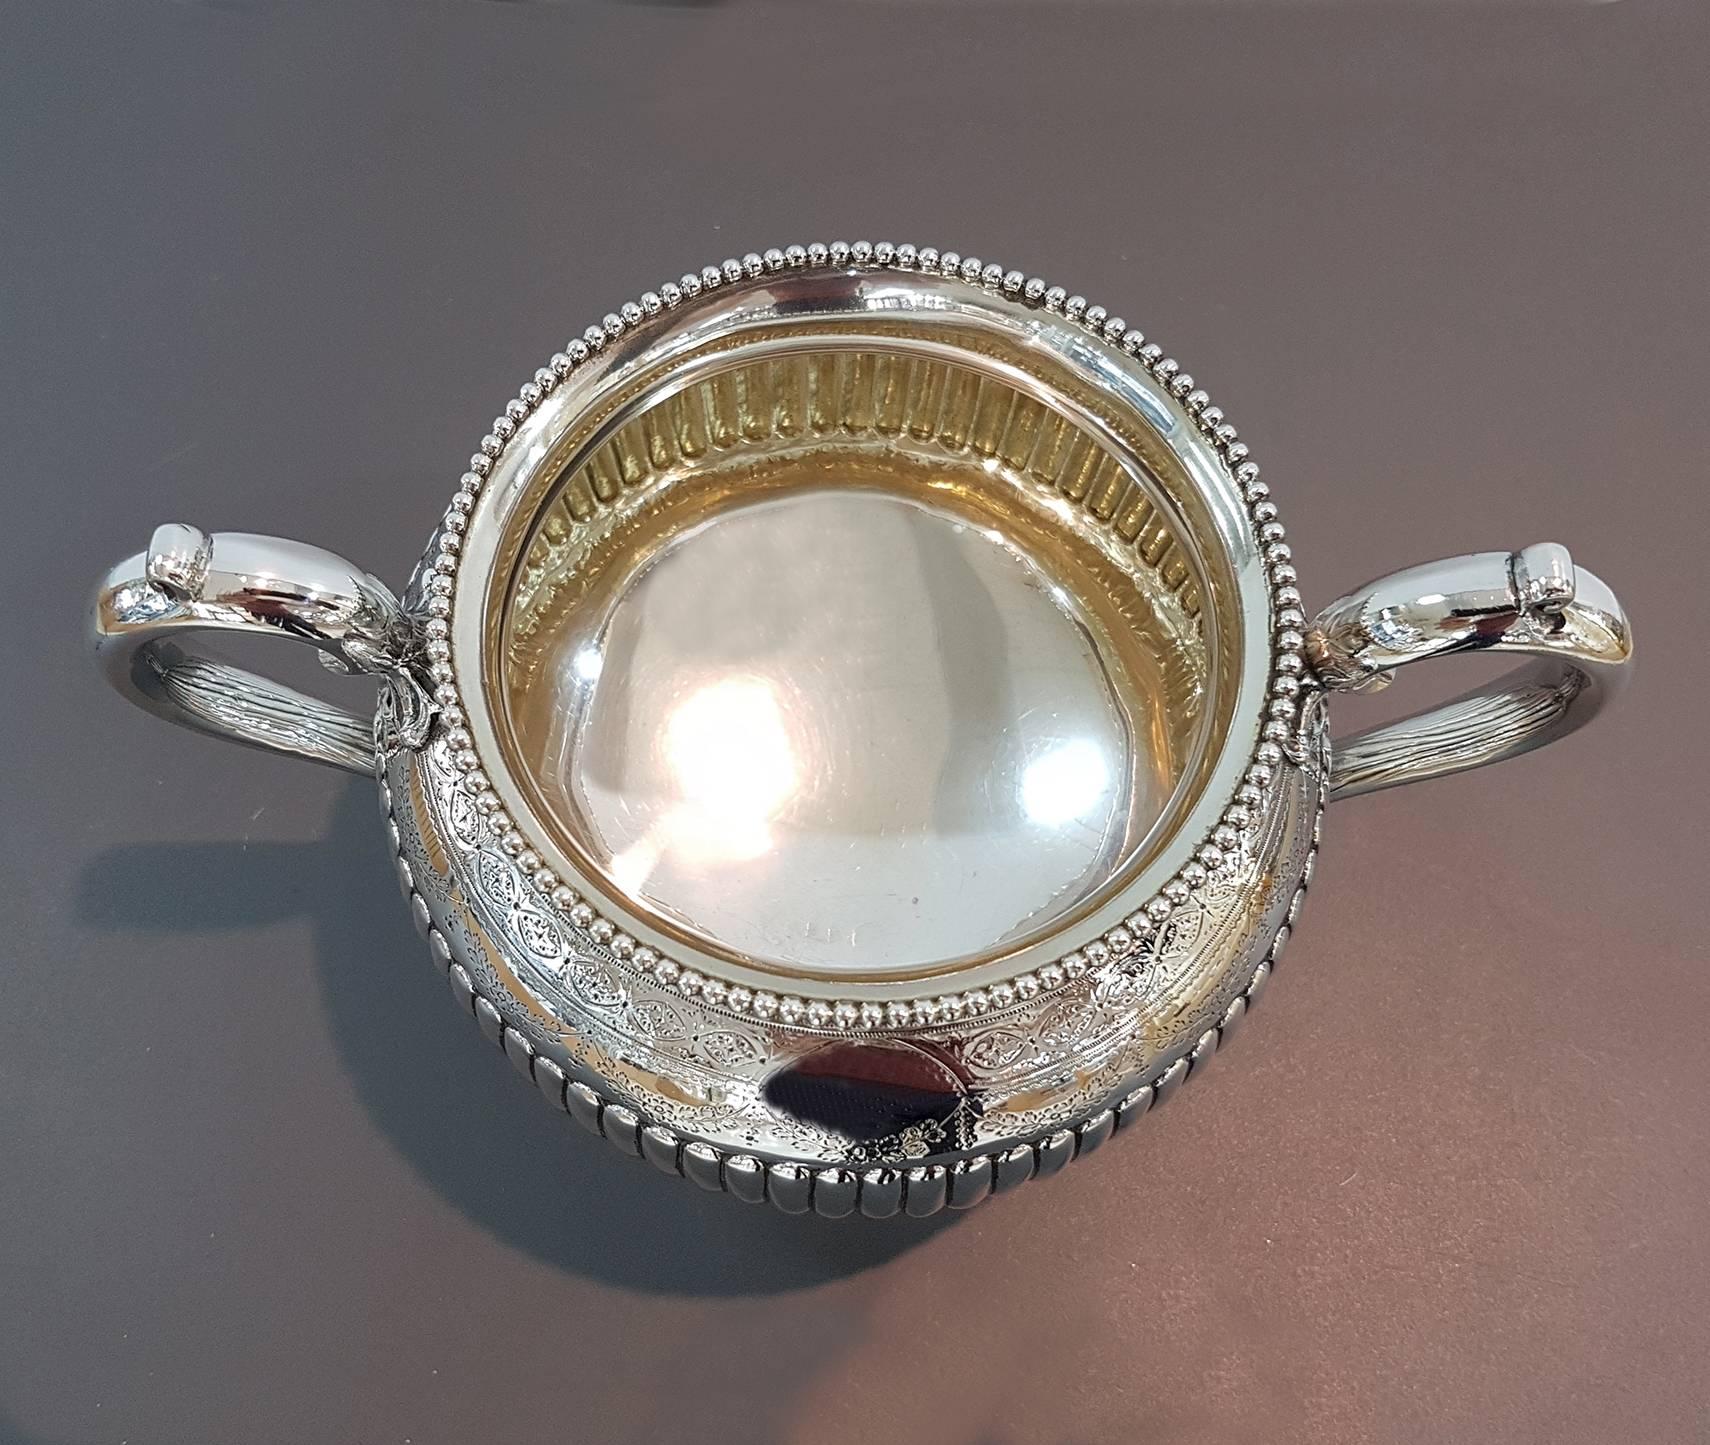 Antique large Victorian sterling silver sugar bowl, having a round body with hand-chased half-fluted decoration, and sitting on a flat base. Made by John Aldwinckle & Thomas Slater, of London in 1888.
The dimensions of this fine handmade antique